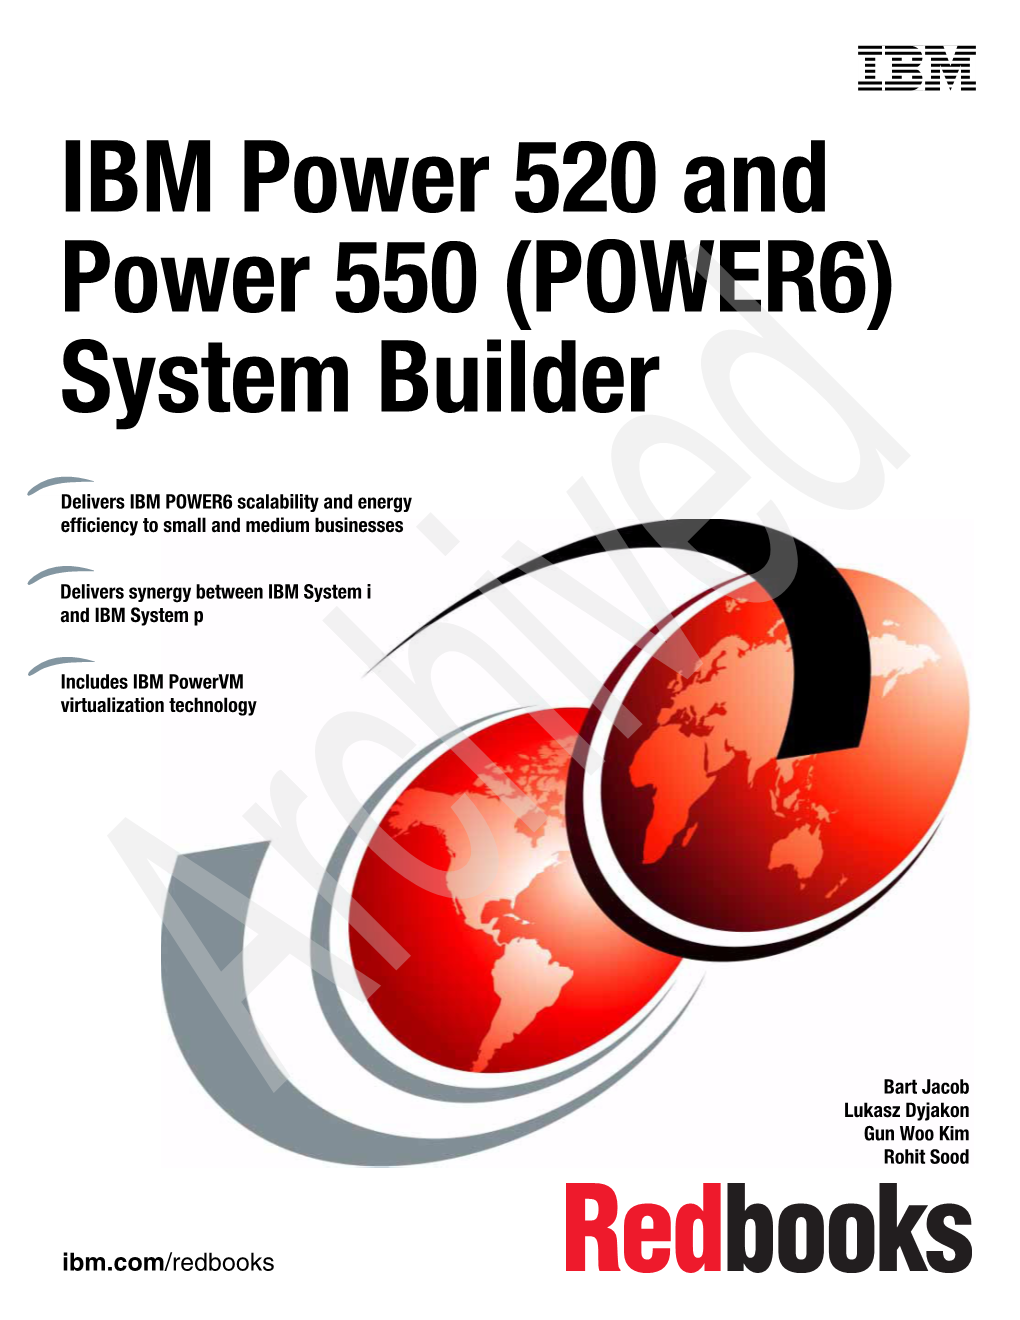 IBM Power 520 and Power 550 (POWER6) System Builder